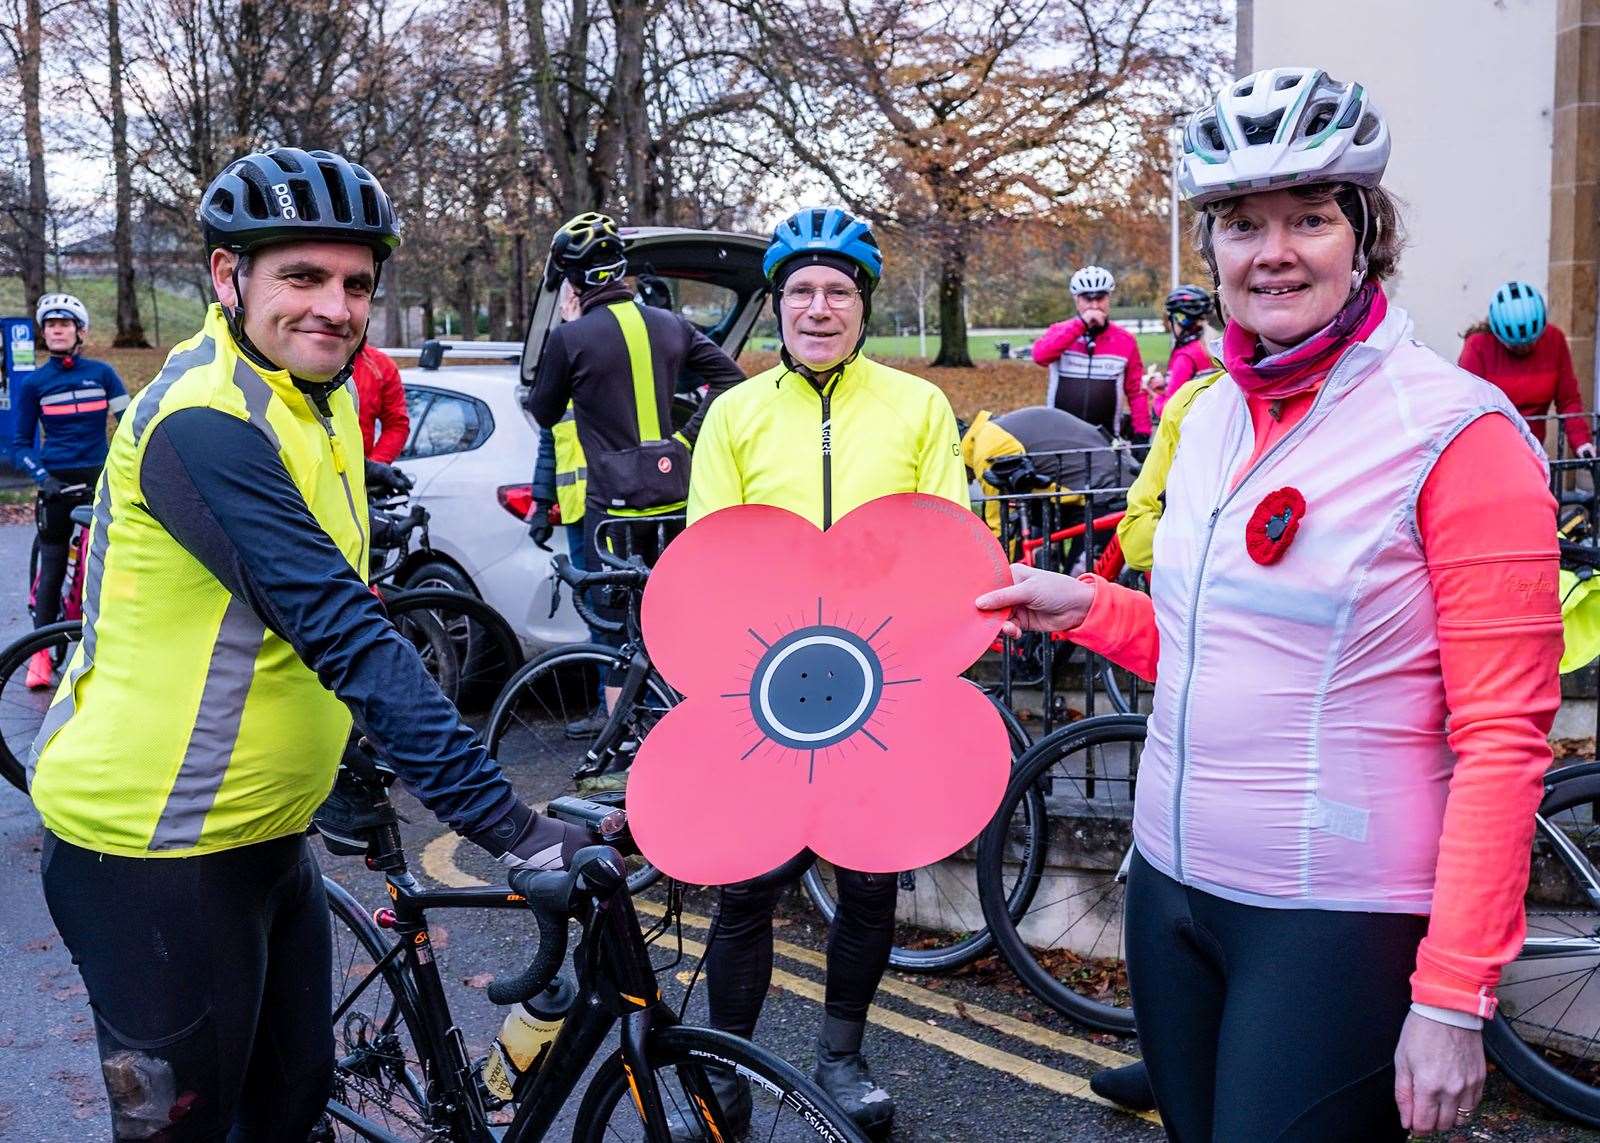 The event raised funds for Poppy Scotland. Elgin Cycling Club's Diane Maciver is pictured right. Picture: Tony Carroll